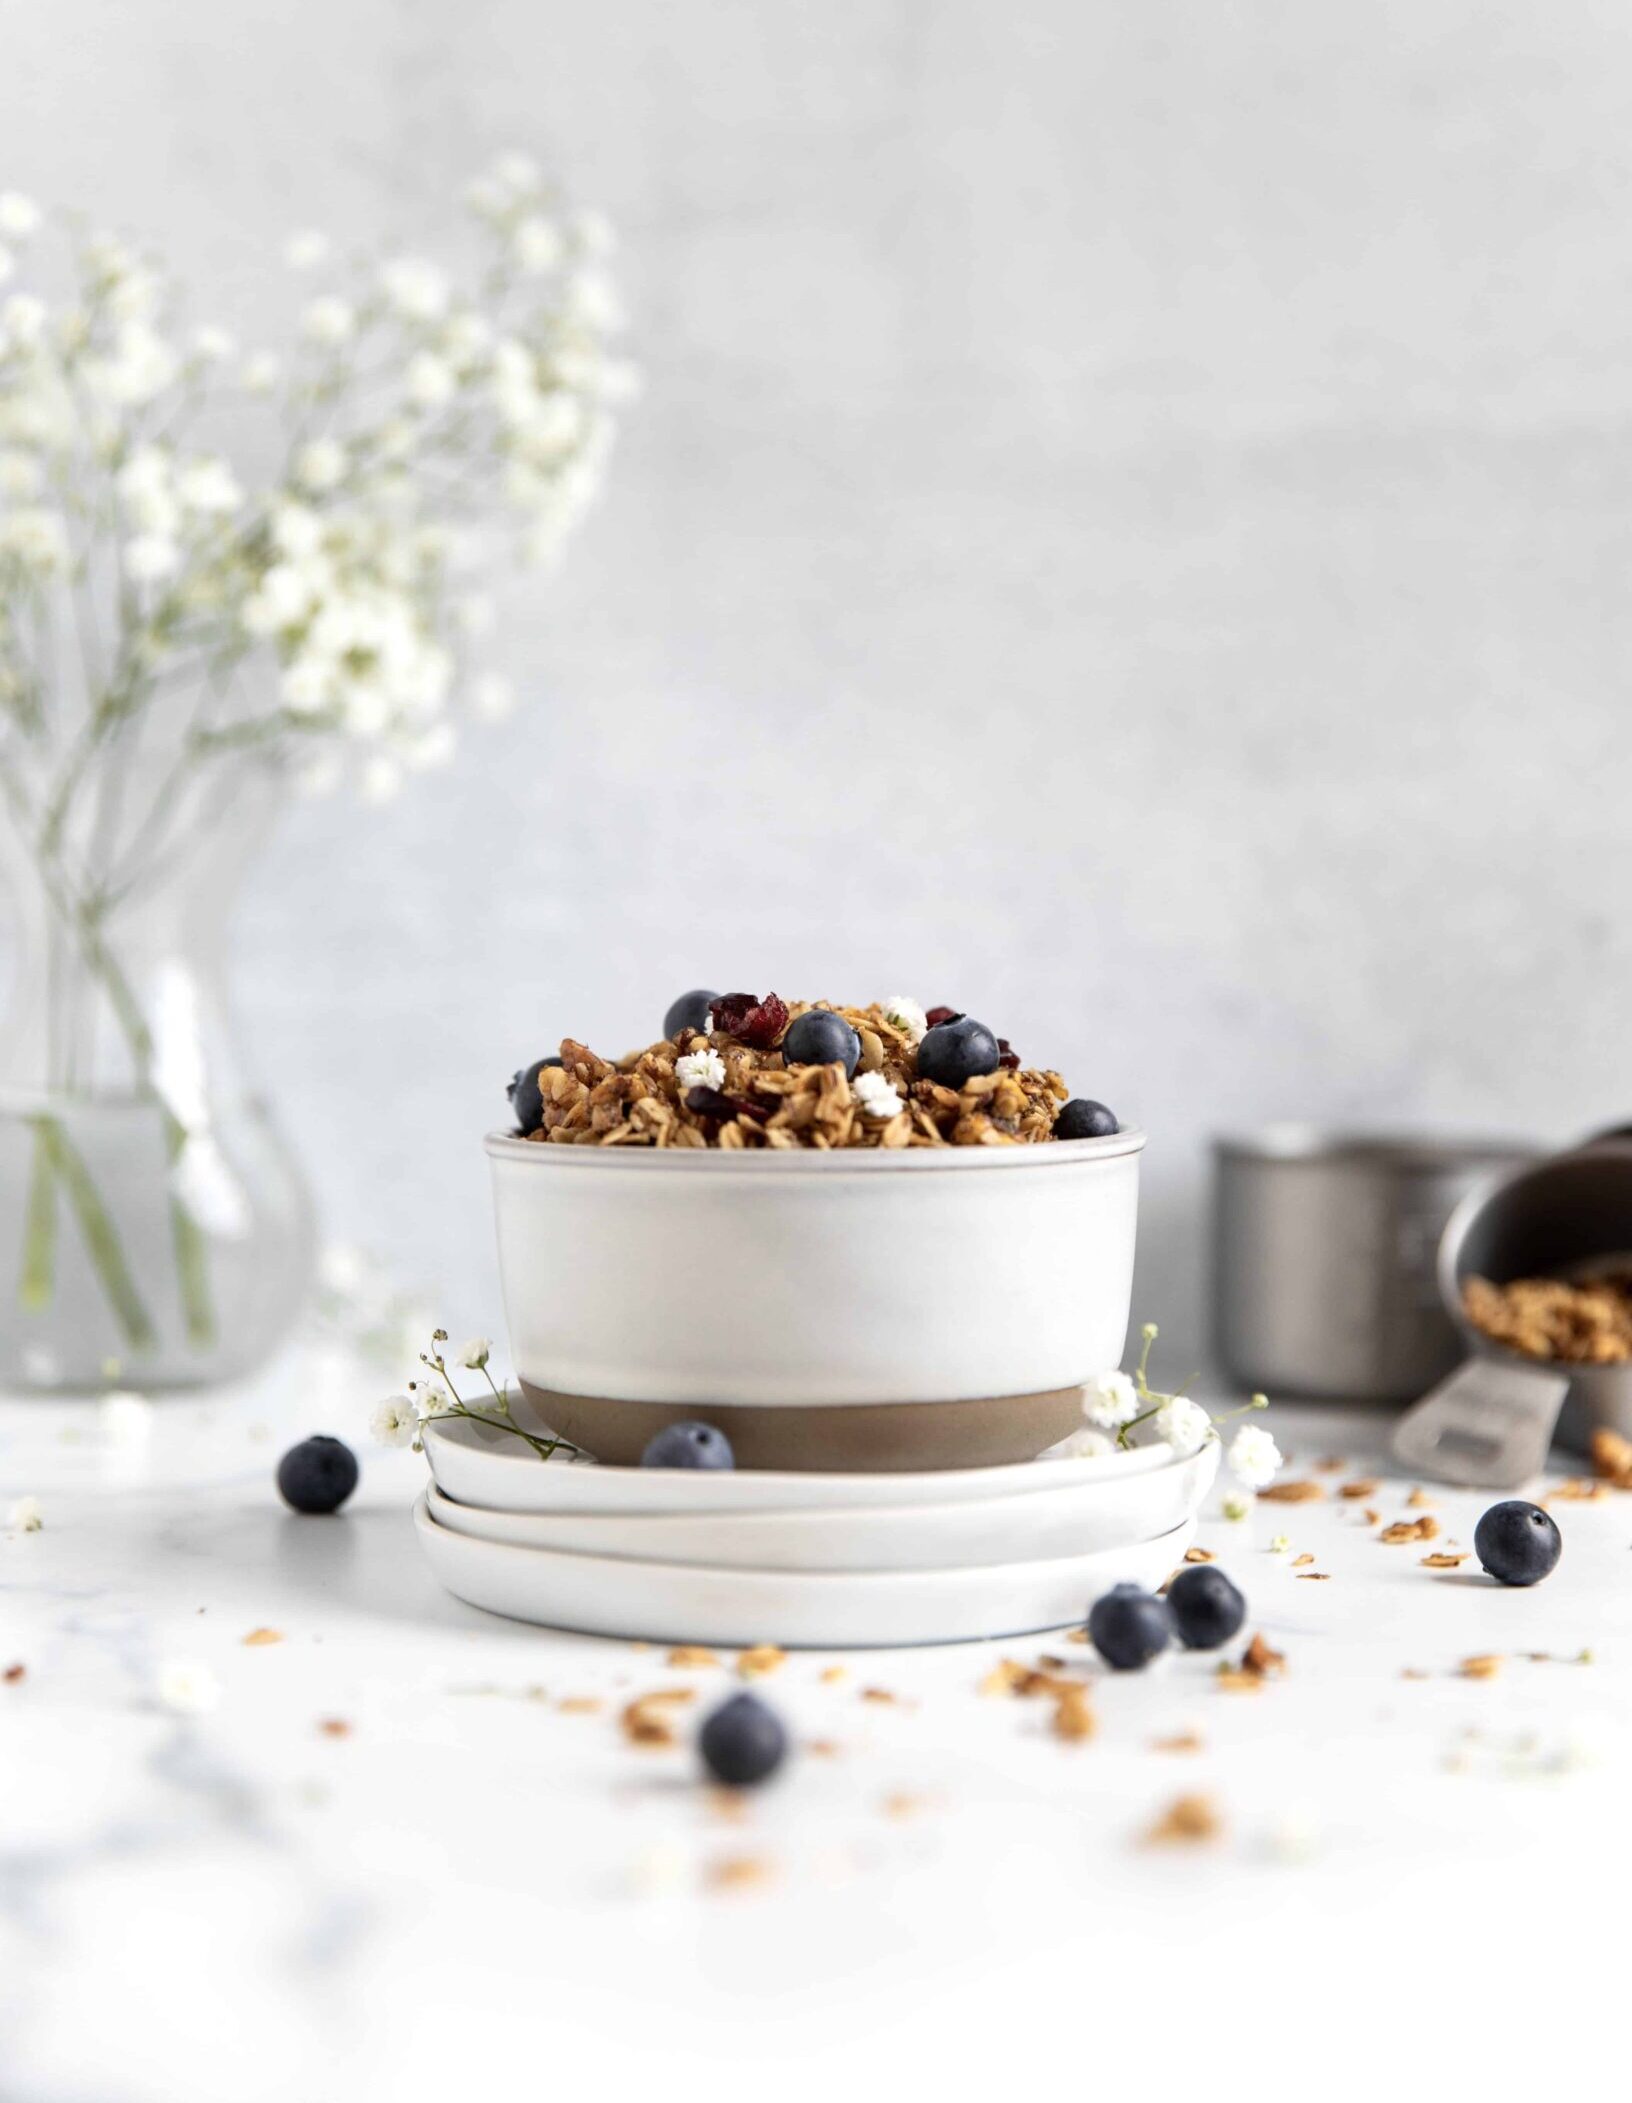 bowl of granola cereal with blueberries on top and flower vase in background